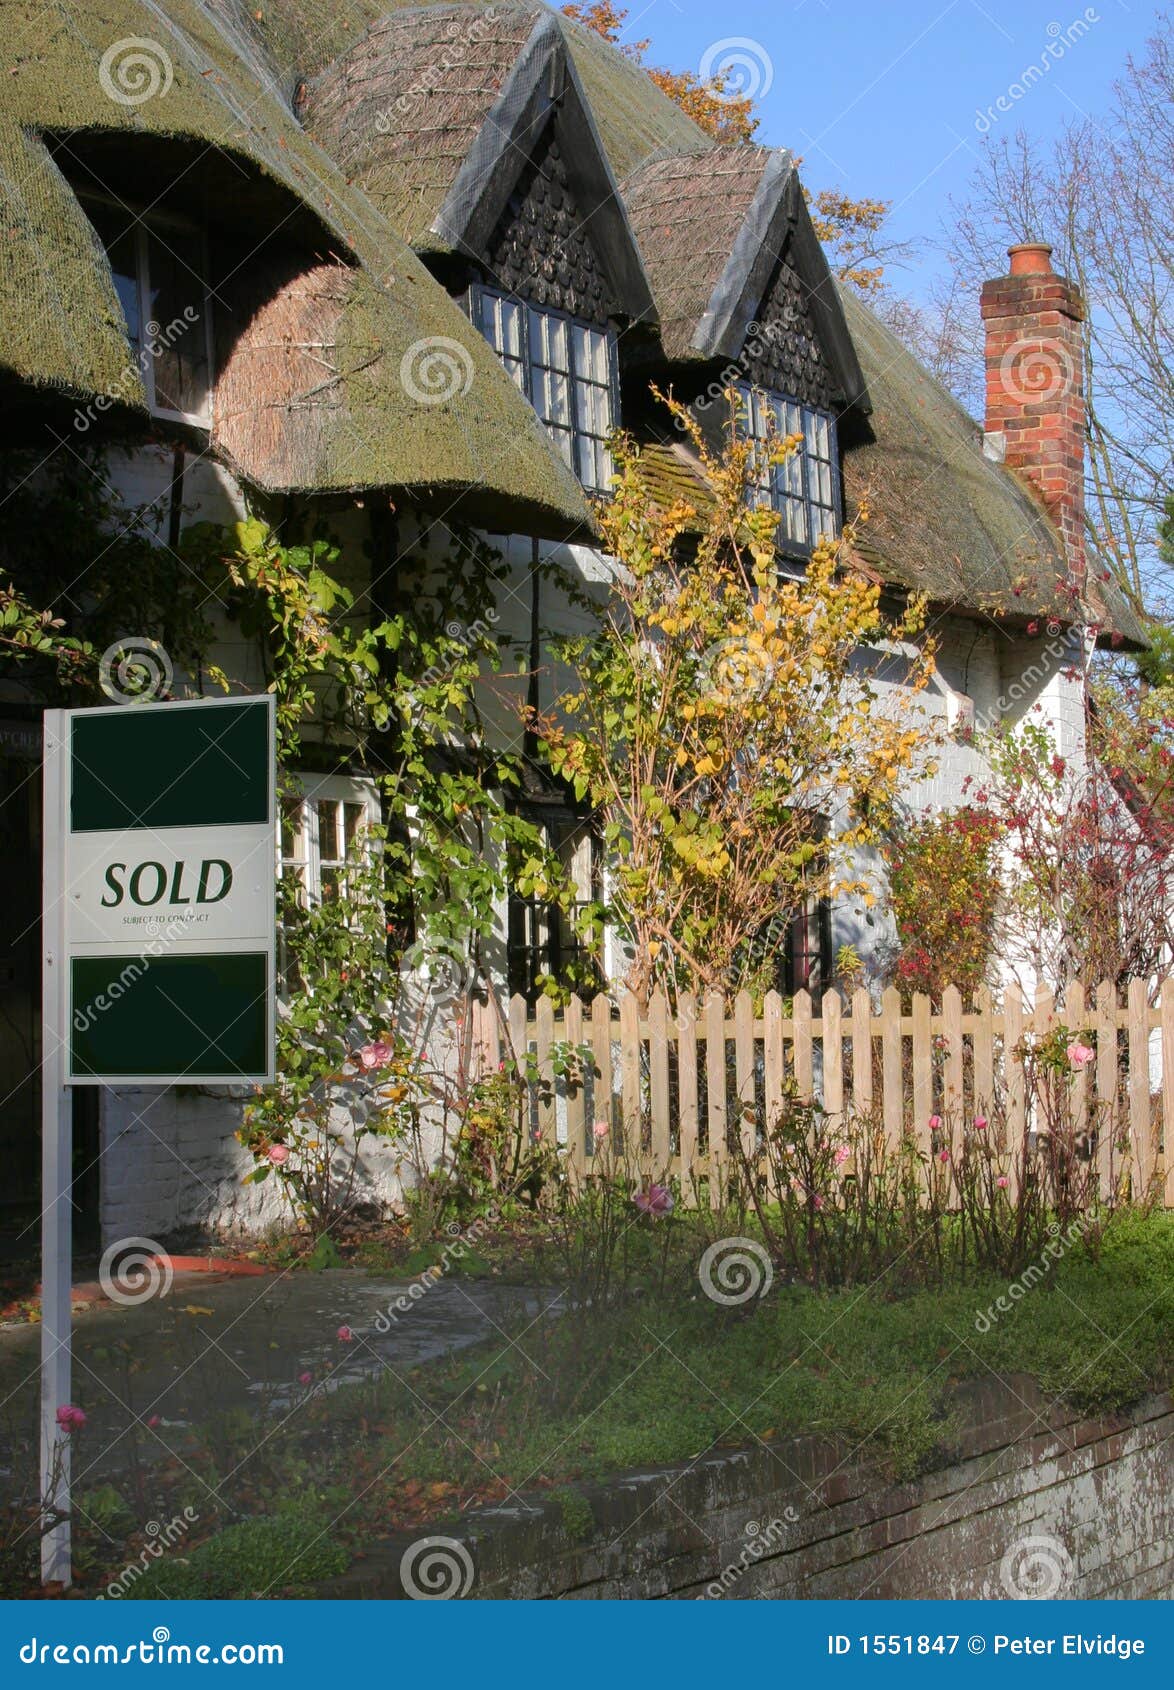 http://thumbs.dreamstime.com/z/country-cottage-sale-1551847.jpg